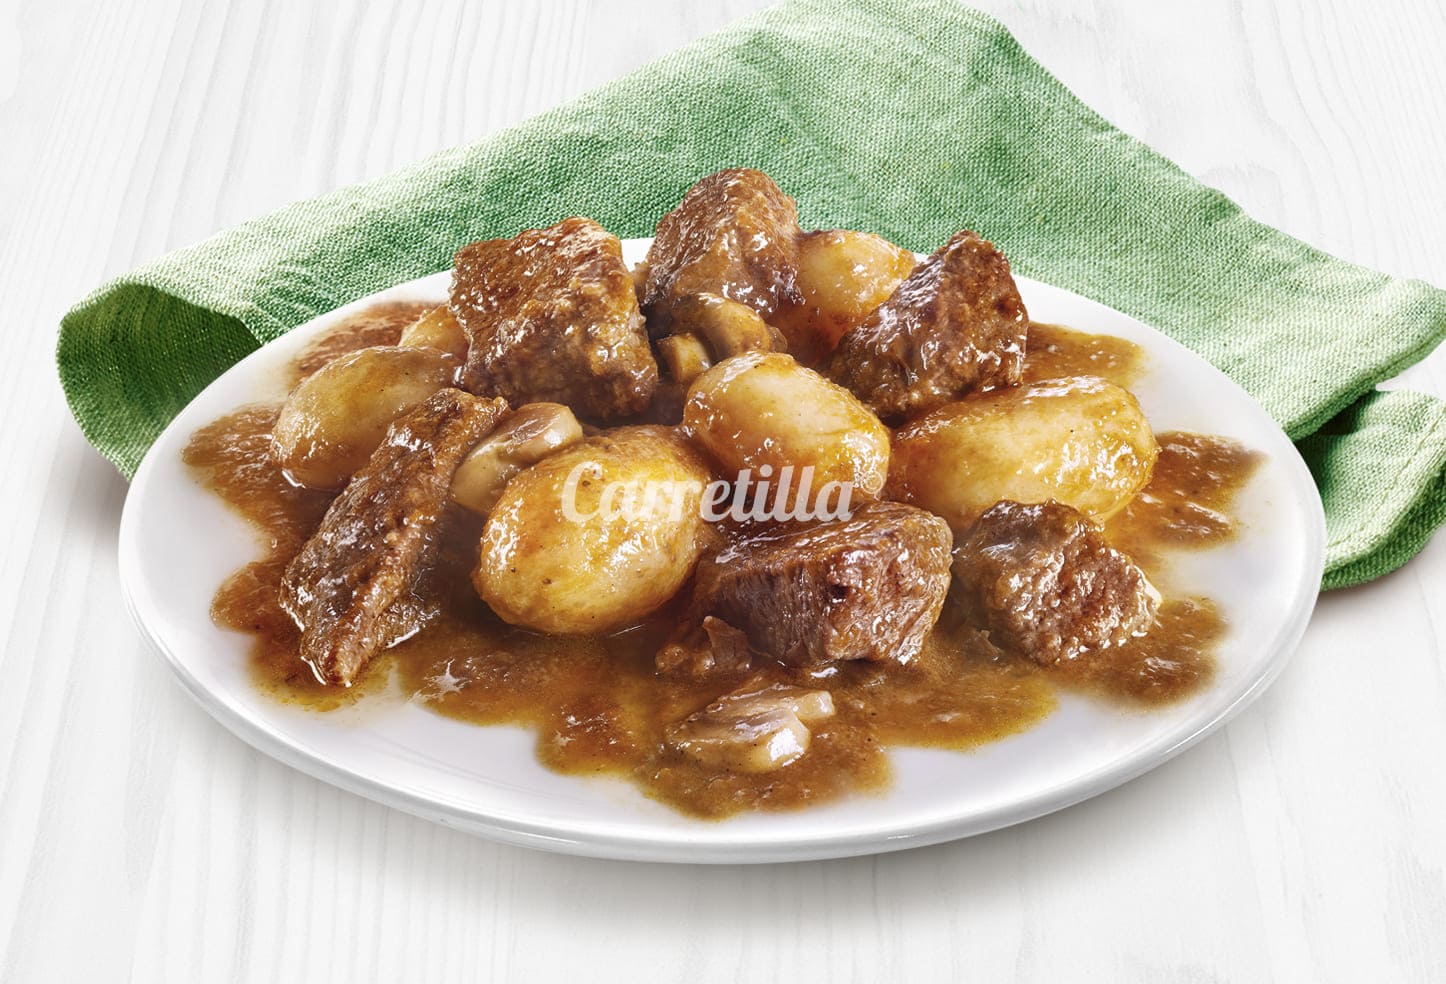 Veal Ragout in a Port wine sauce with Parisian Potatoes